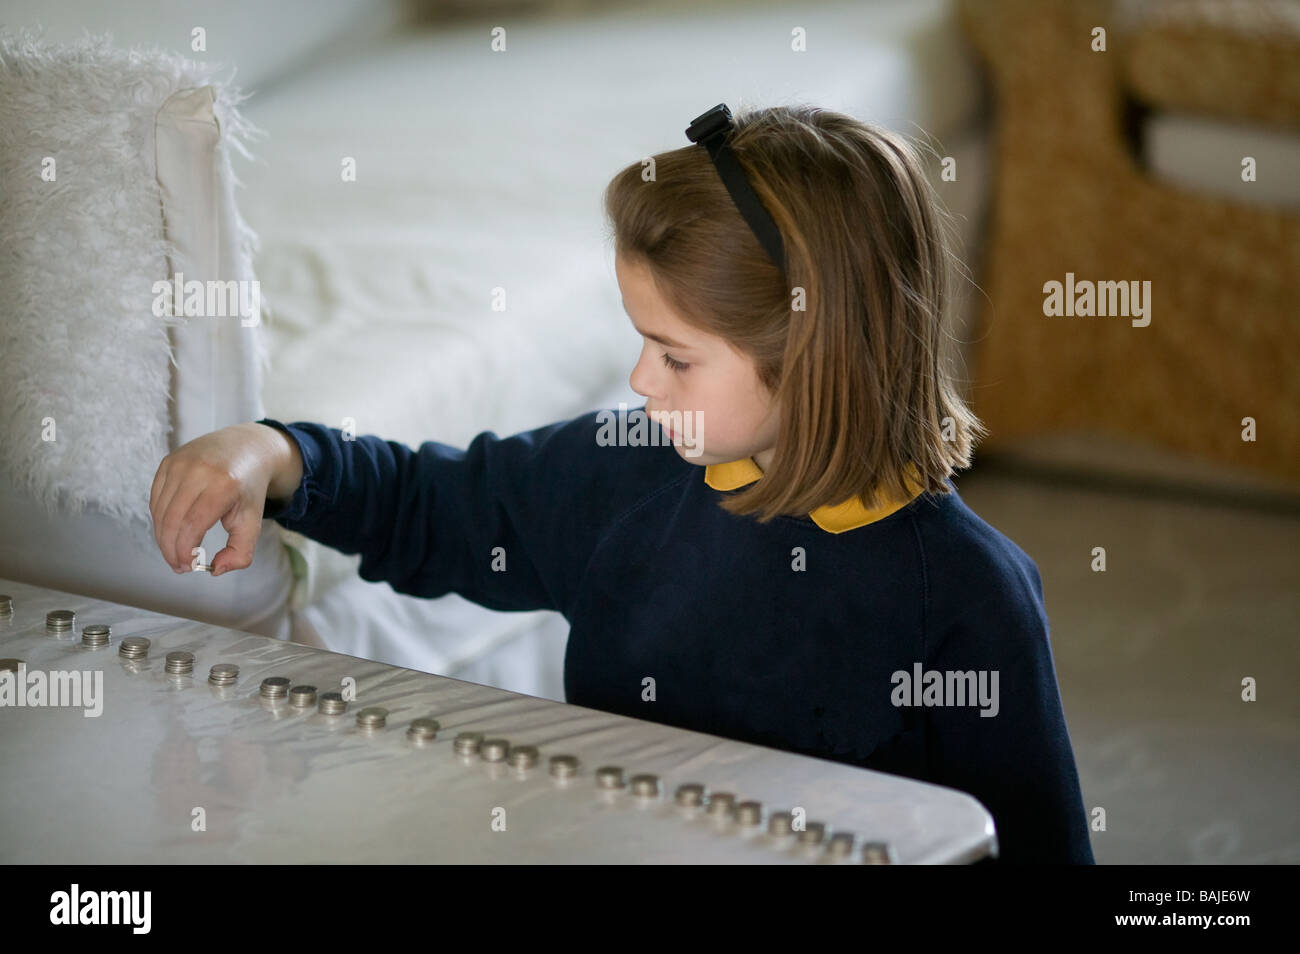 young school girl looking thoughtful counting out money into piles of coins at home Stock Photo